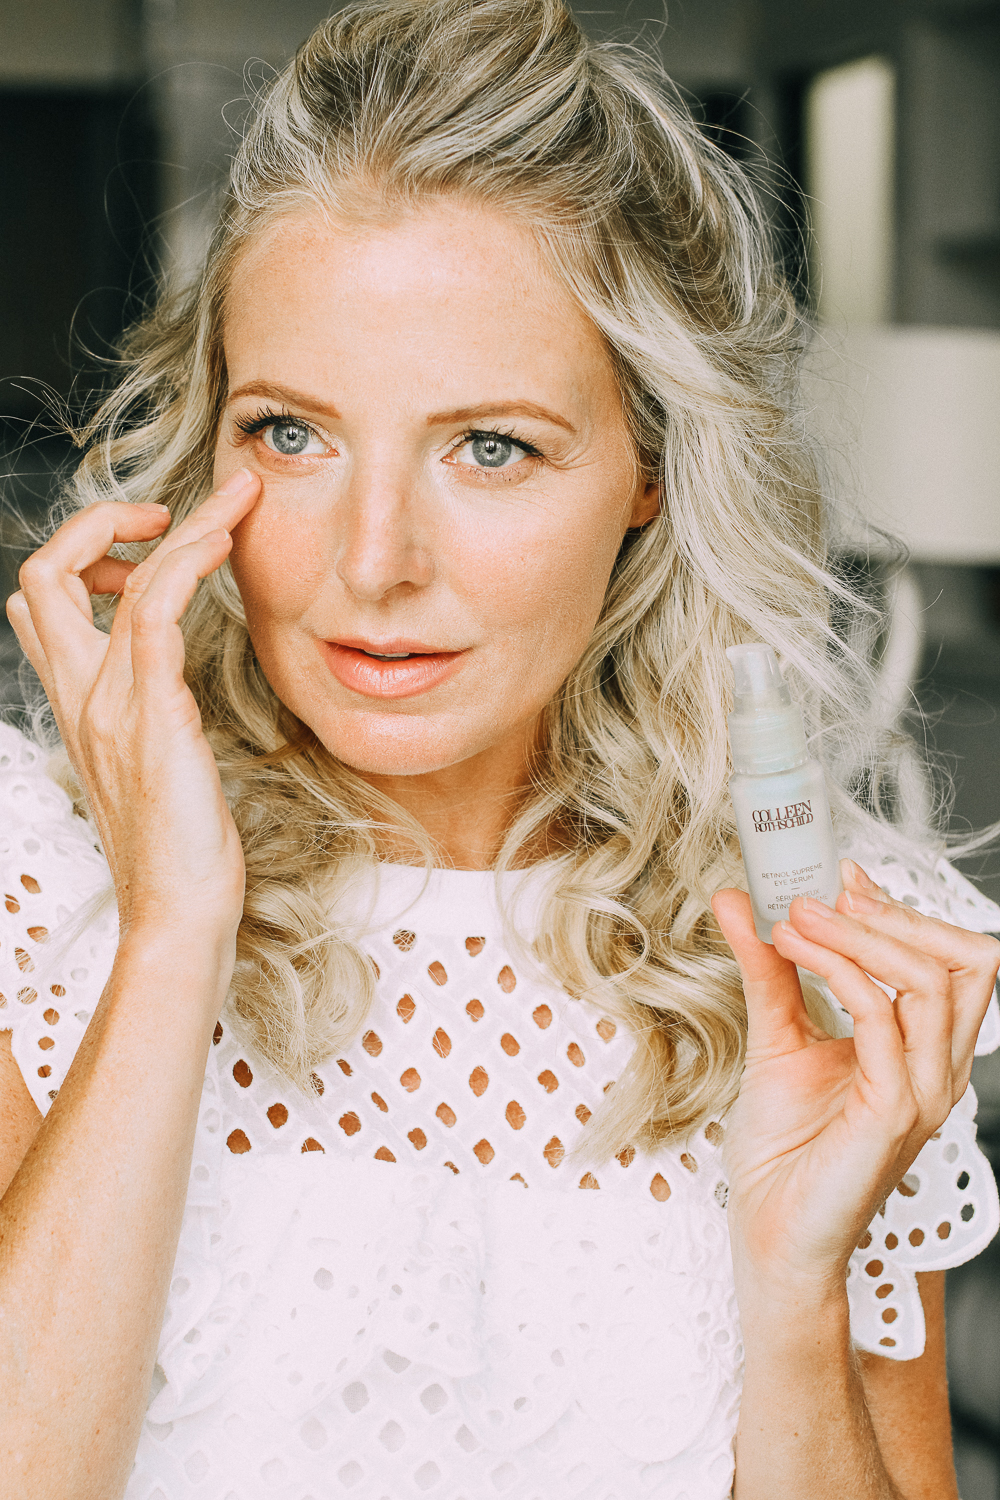 Anti-aging skincare with retinol by Colleen Rothschild sale